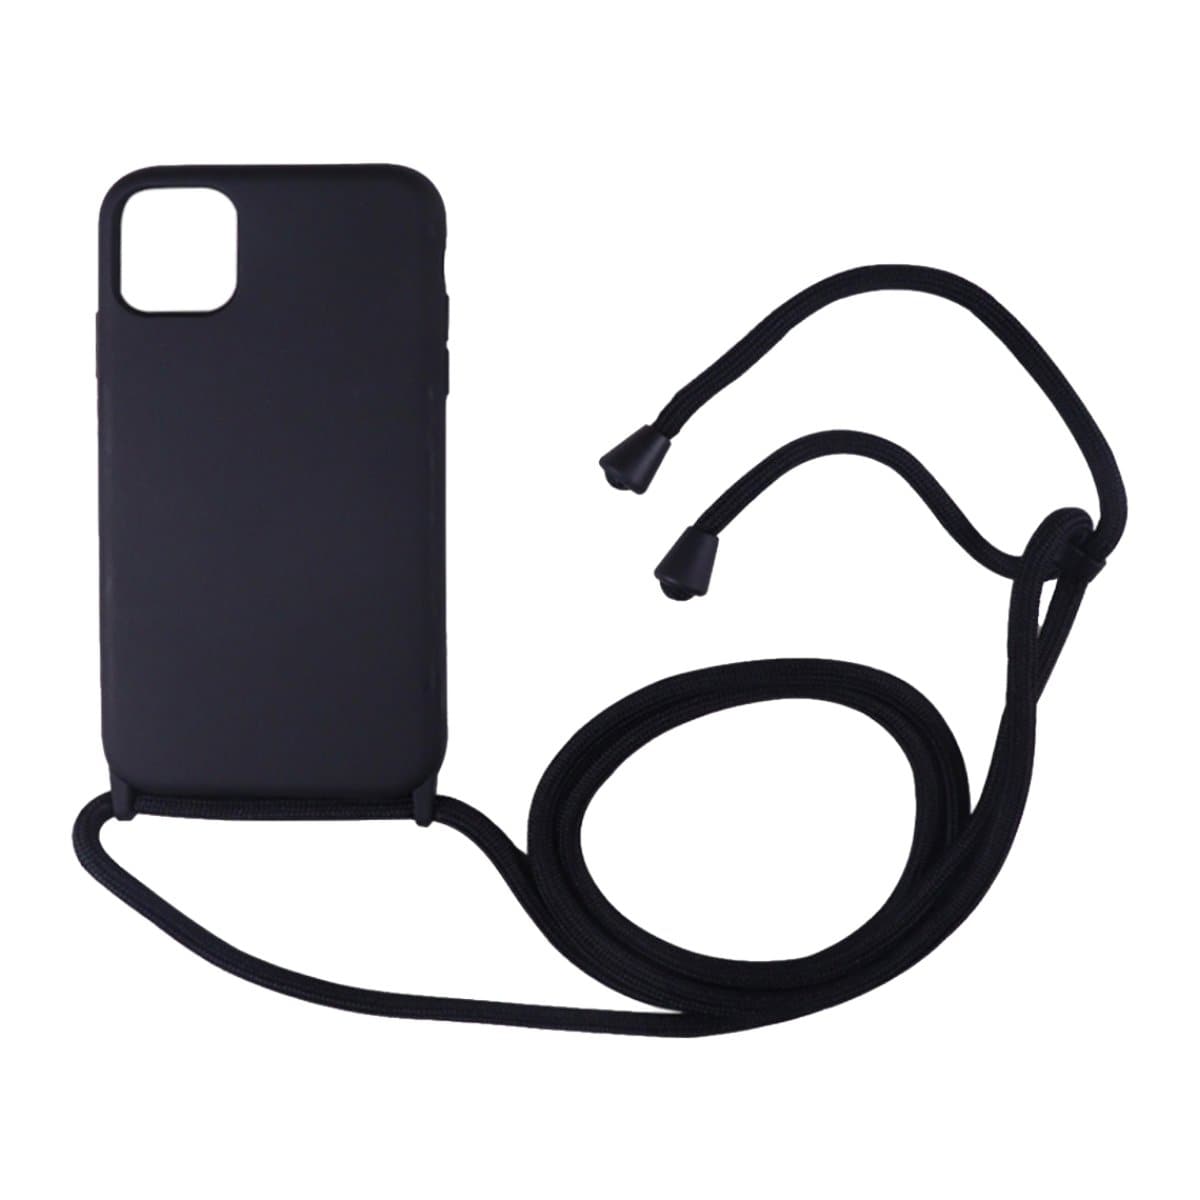 Crossbody and Necklace Silicon Phone Case for iPhone, Black - Office  Supplie... - Office One LLC